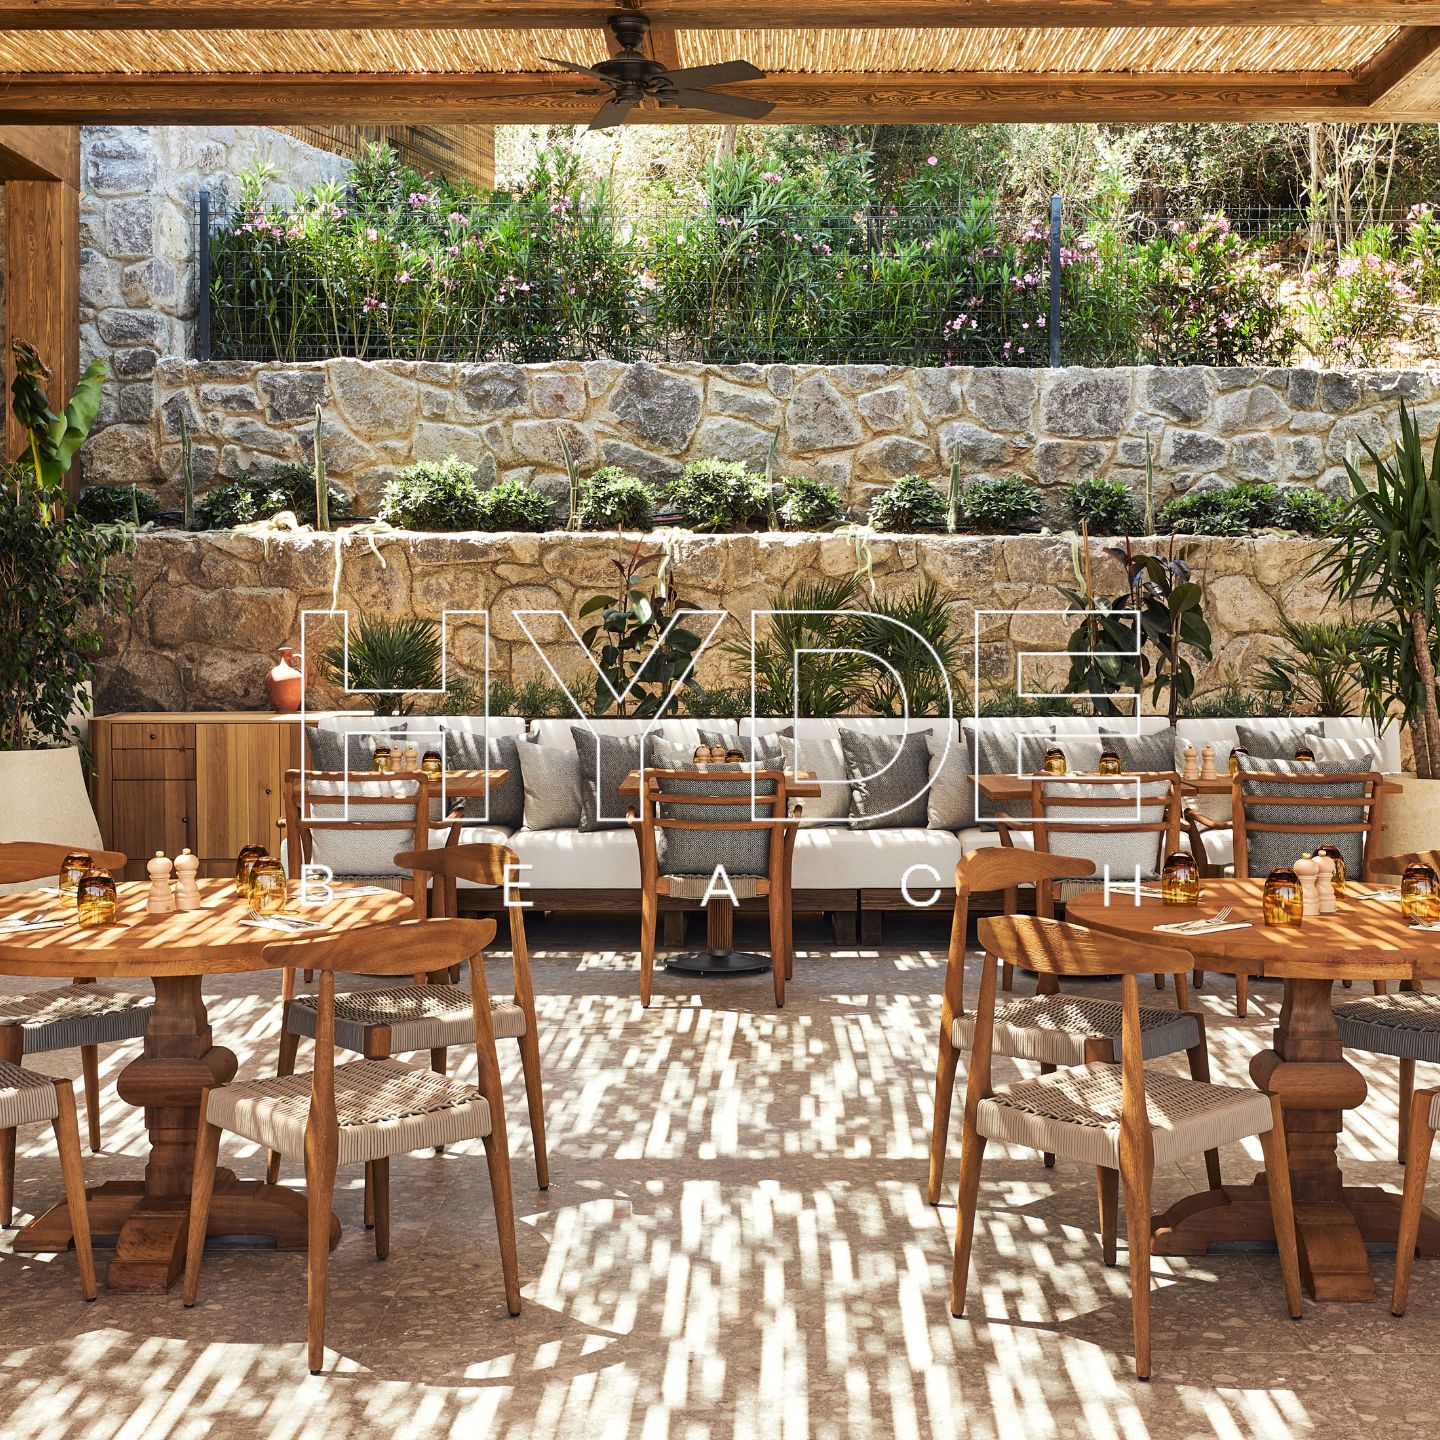 Outdoor restaurant with wooden tables and wooden chairs, stone wall, and patio overhead